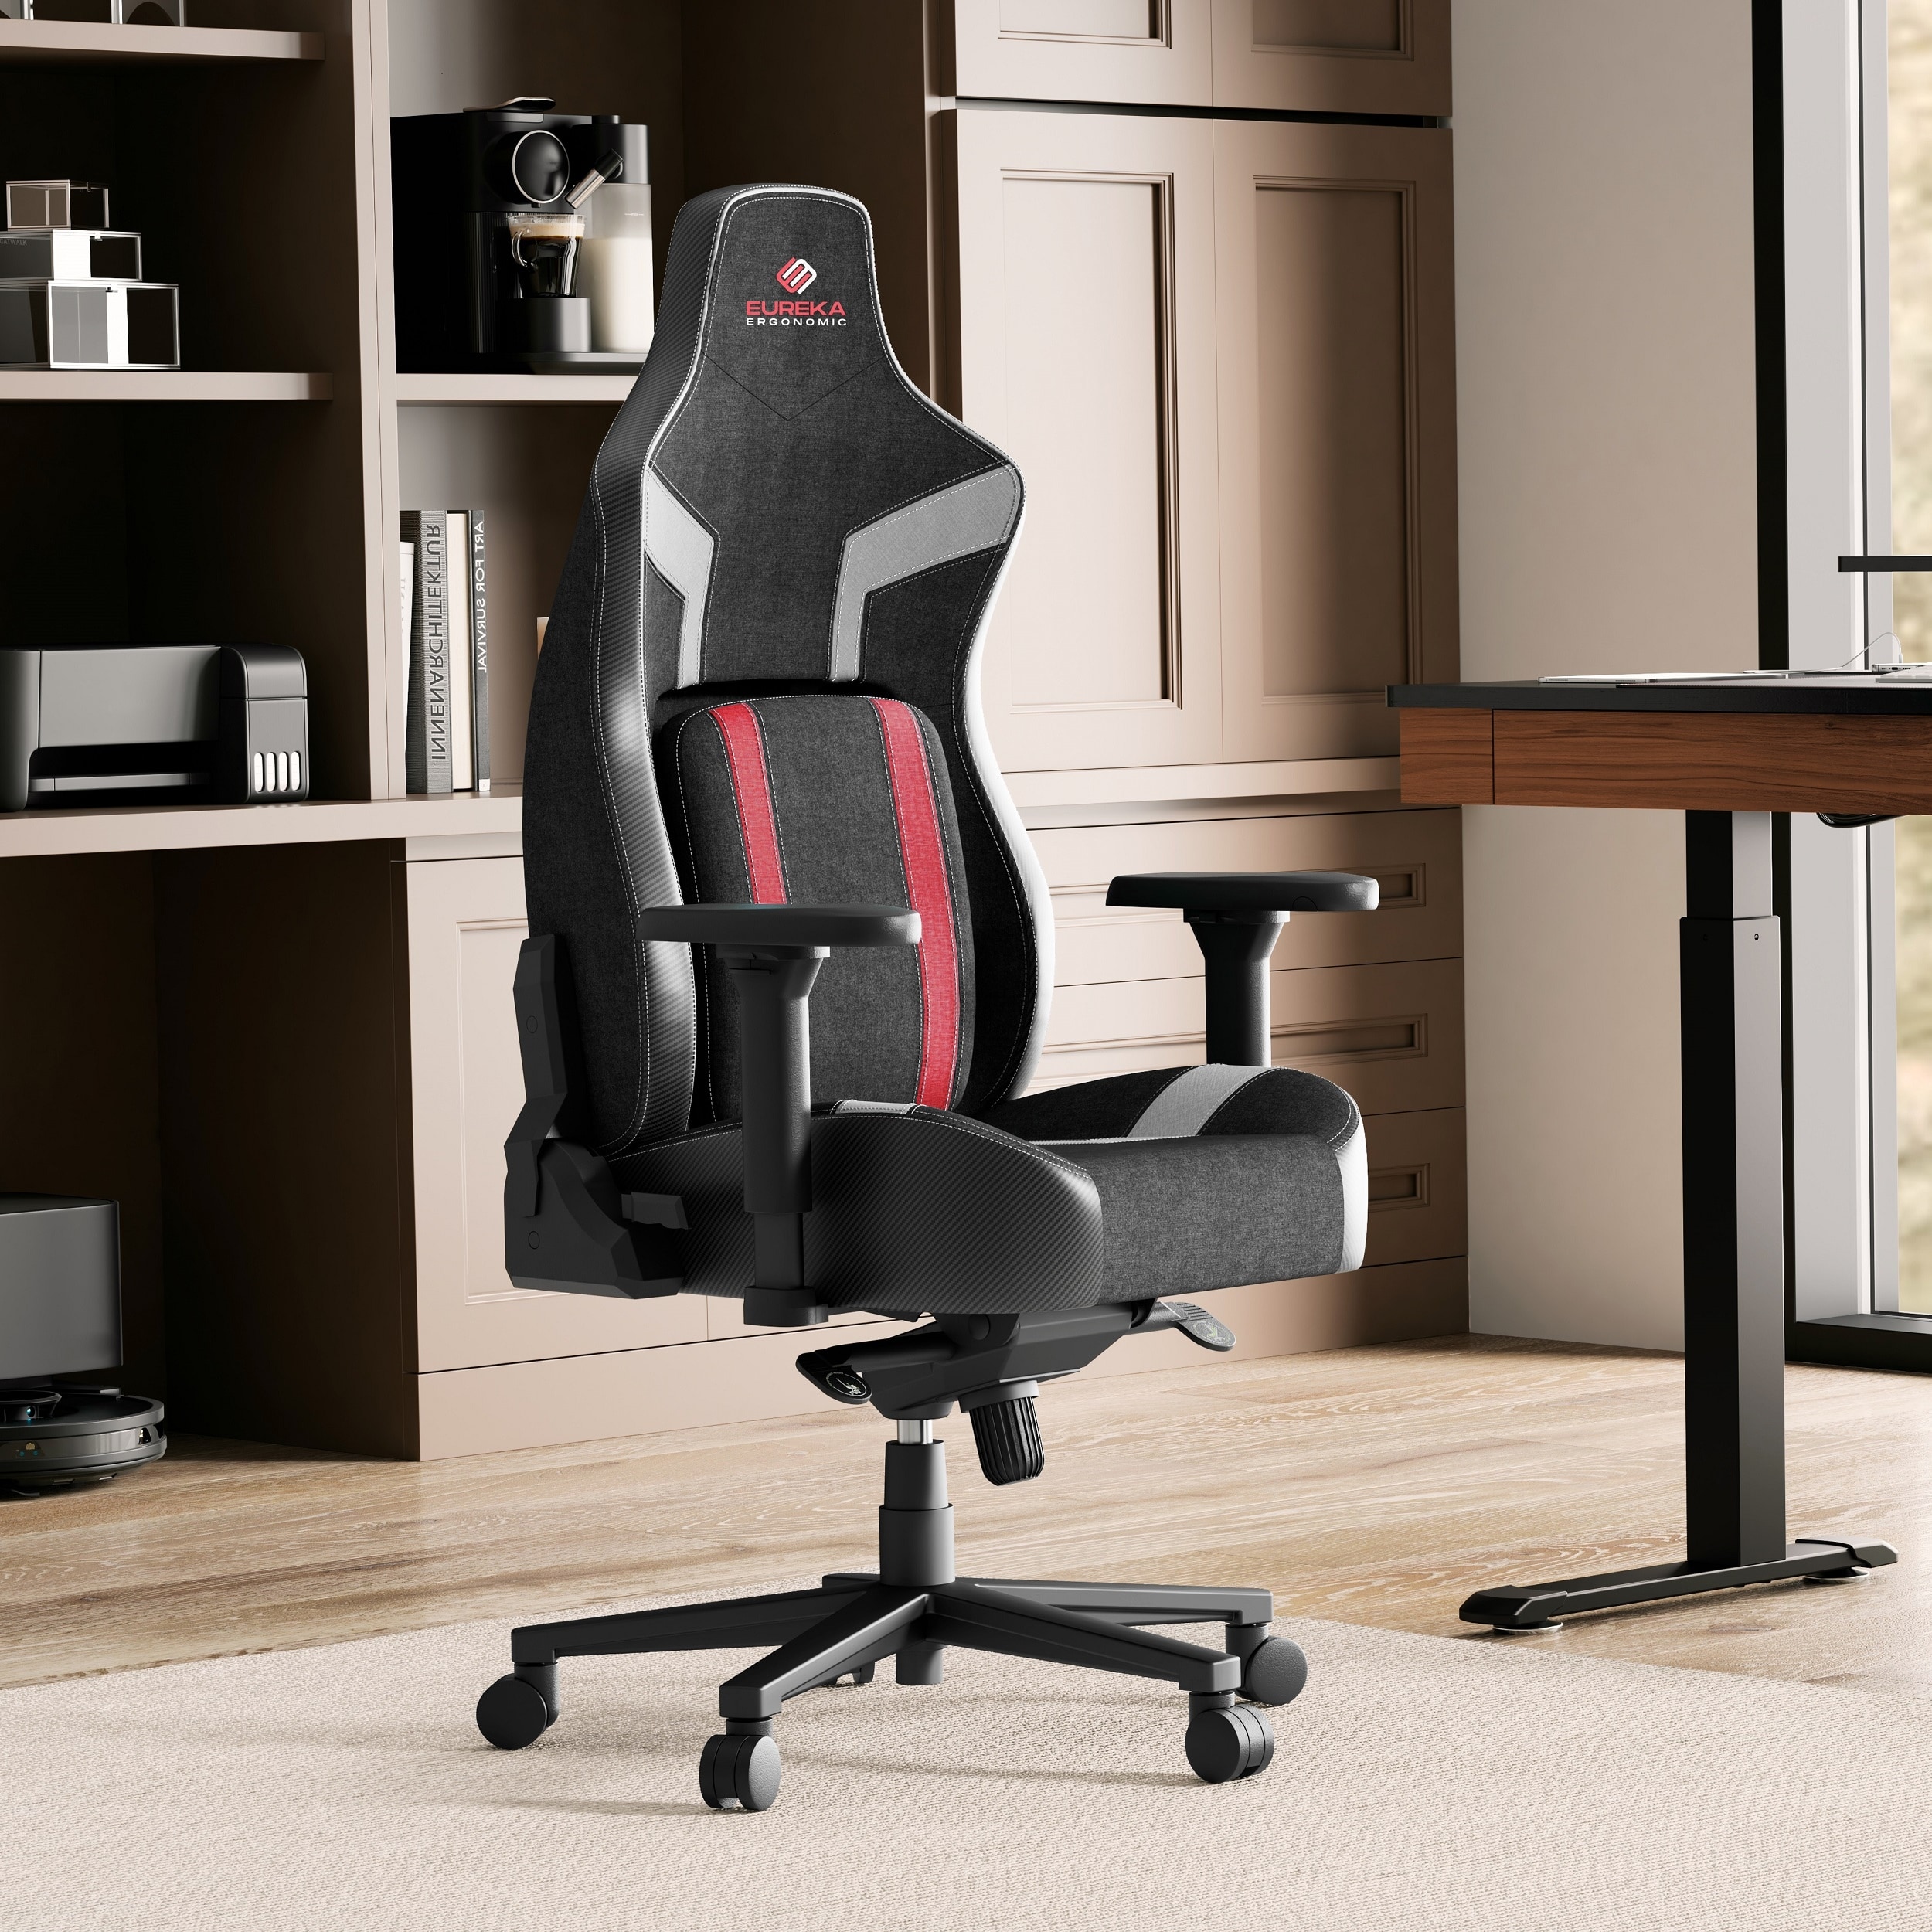 https://ak1.ostkcdn.com/images/products/is/images/direct/7b7258752c3025ef152b455a2d80f8a83a78a886/Eureka-Ergonomic-Gaming-Chair-Fabric-Home-Executive-Office-Chair-with-Lumbar-Support-%26-4D-Armrests.jpg